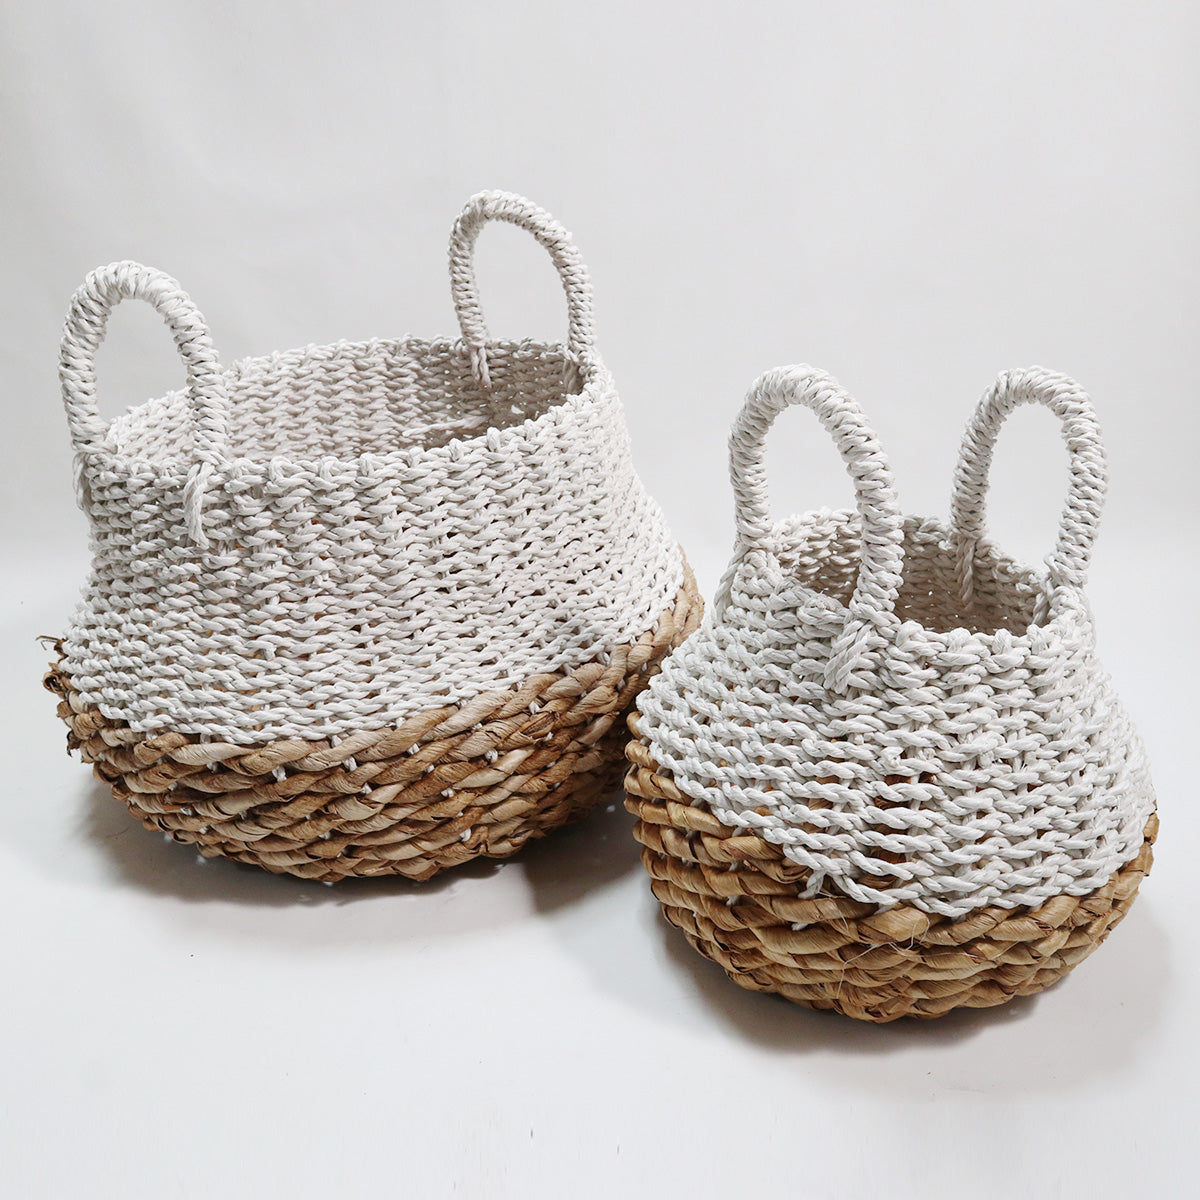 HBSC076 SET OF TWO NATURAL AND WHITE MENDONG AND SEAGRASS BASKETS